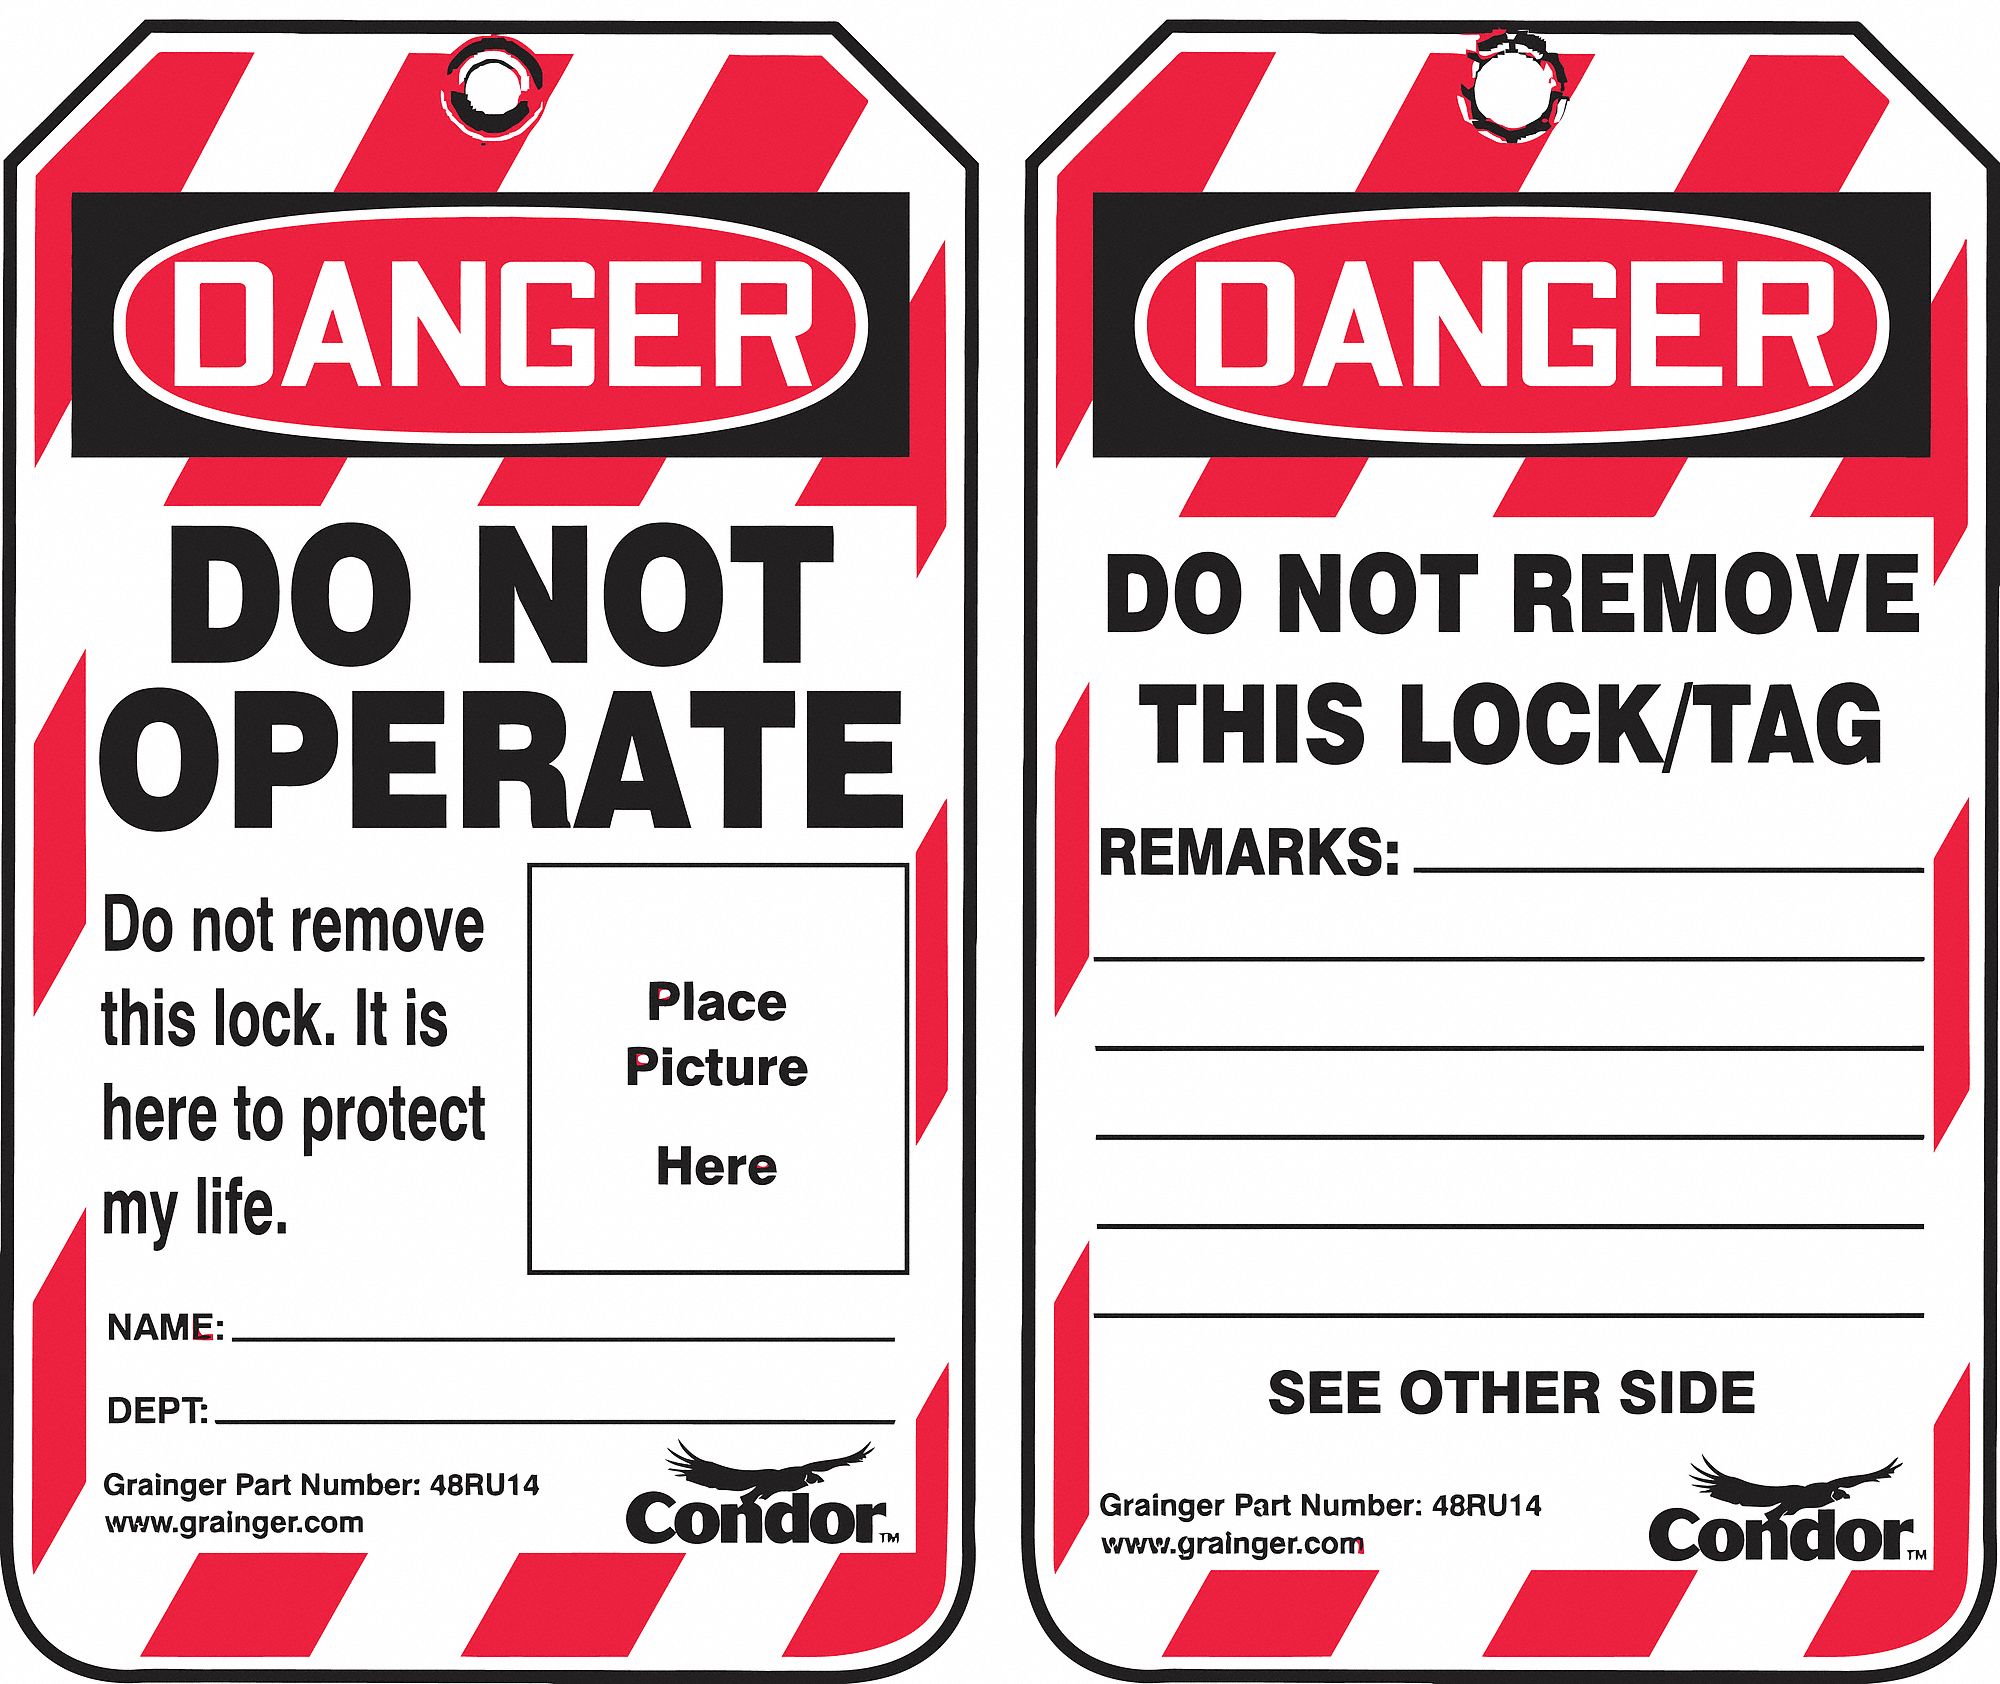 Black/Red/White 5 Height x 3 Width Brady 145767 PlasticDanger DO NOT Operate This Lock/TAG May ONLY BE Removed by: Name: Date: Toughwash Tag Pack of 10